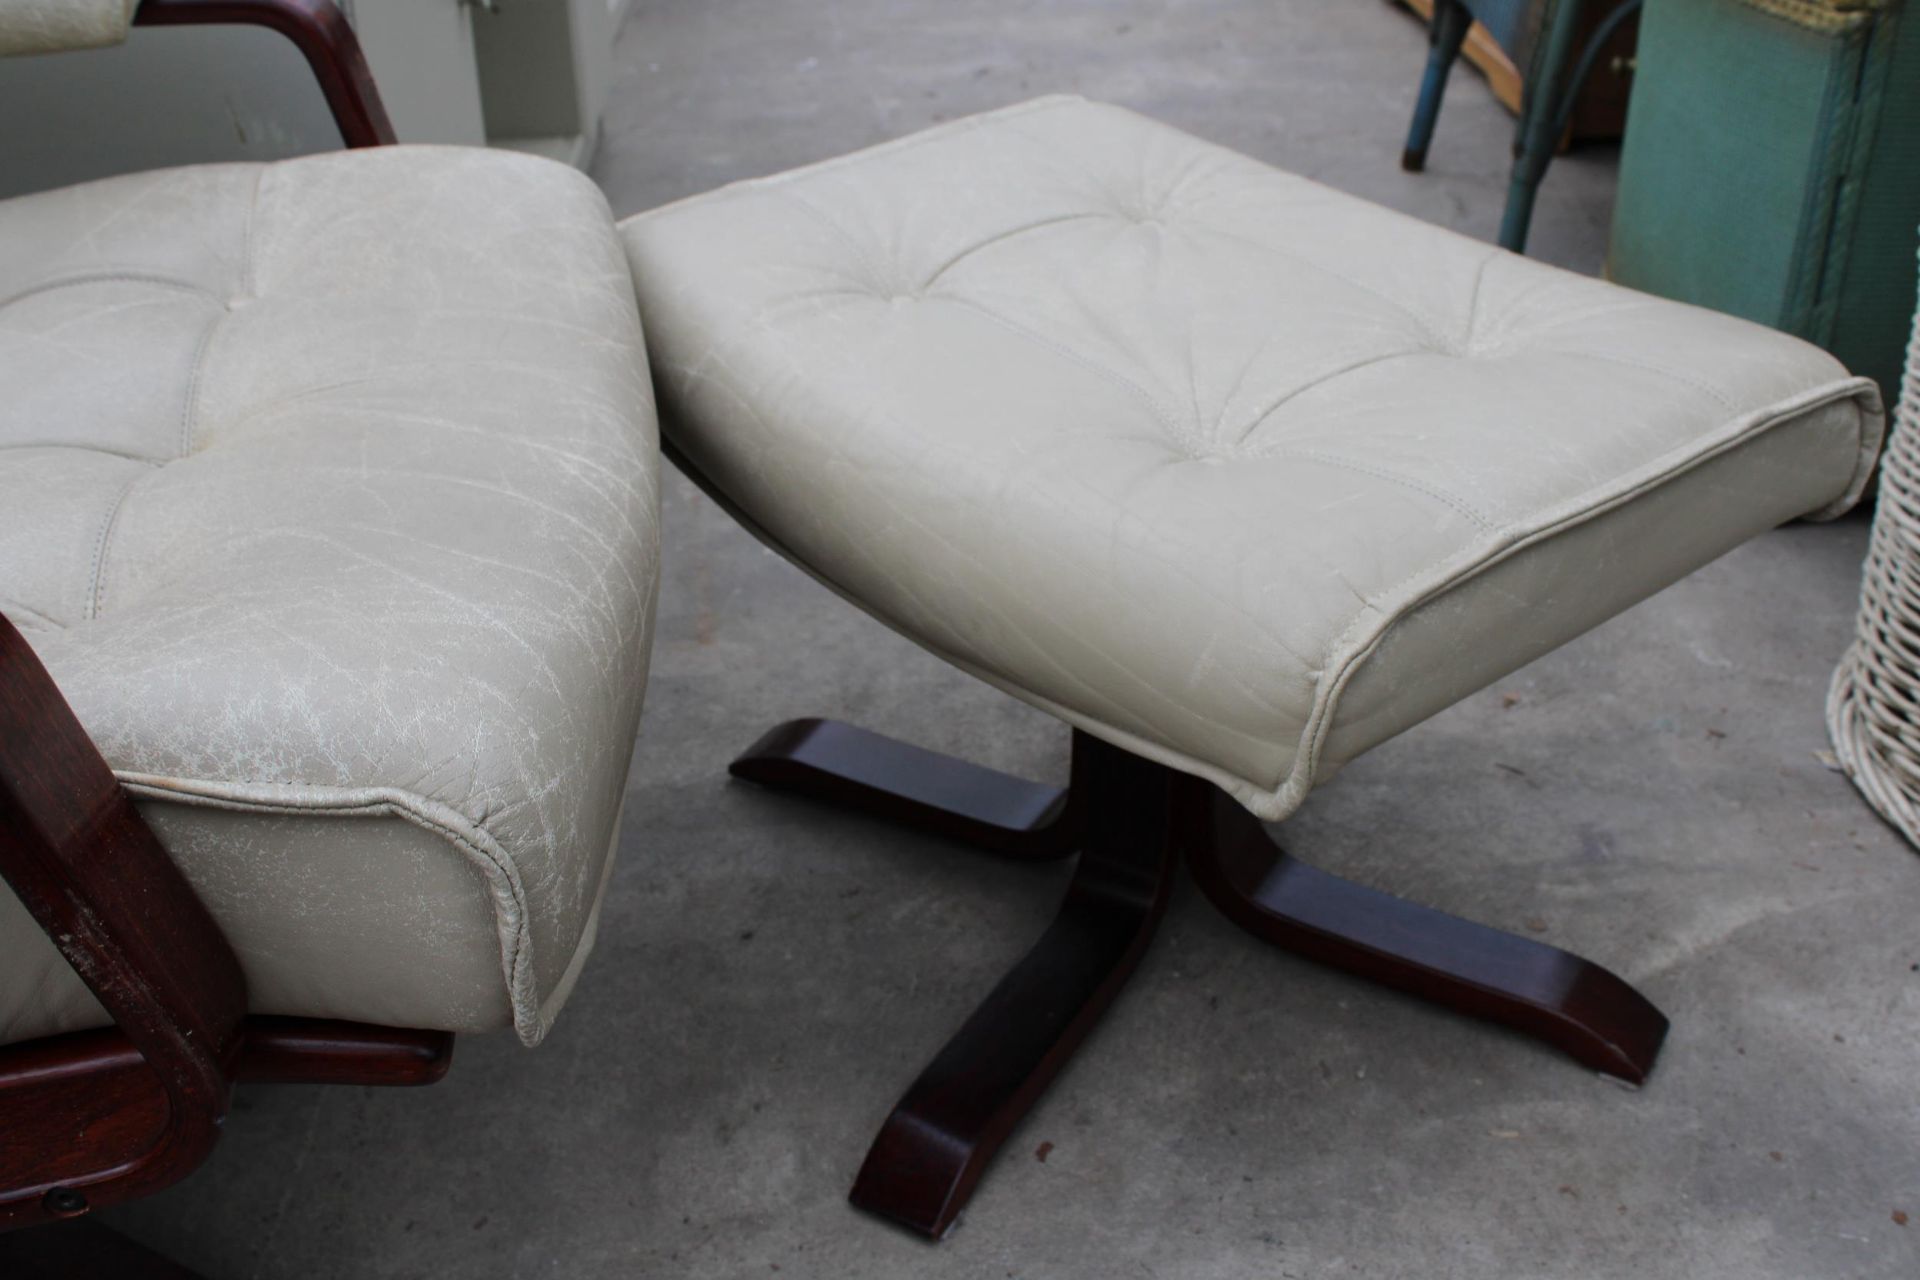 AN ULFERTS (MADE IN SWEDEN) REVOLVING RECLINER CHAIR WITH MATCHING STOOL - Image 3 of 3